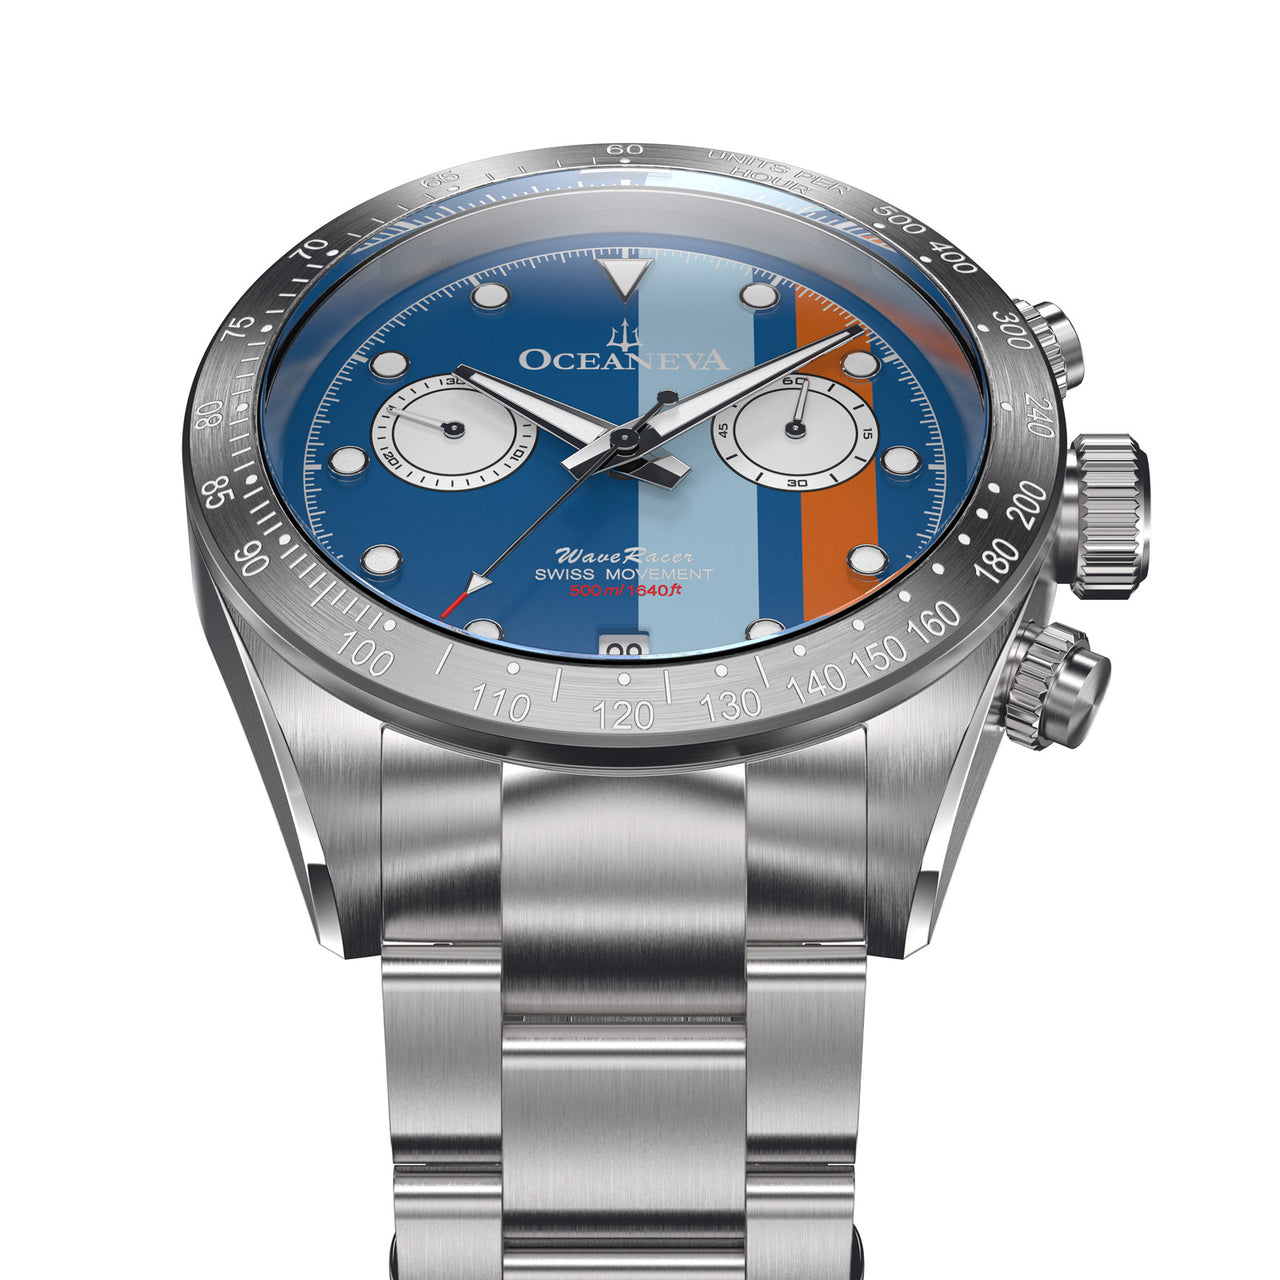 Oceaneva Blue Striped Chronograph Watch Frontal View Picture